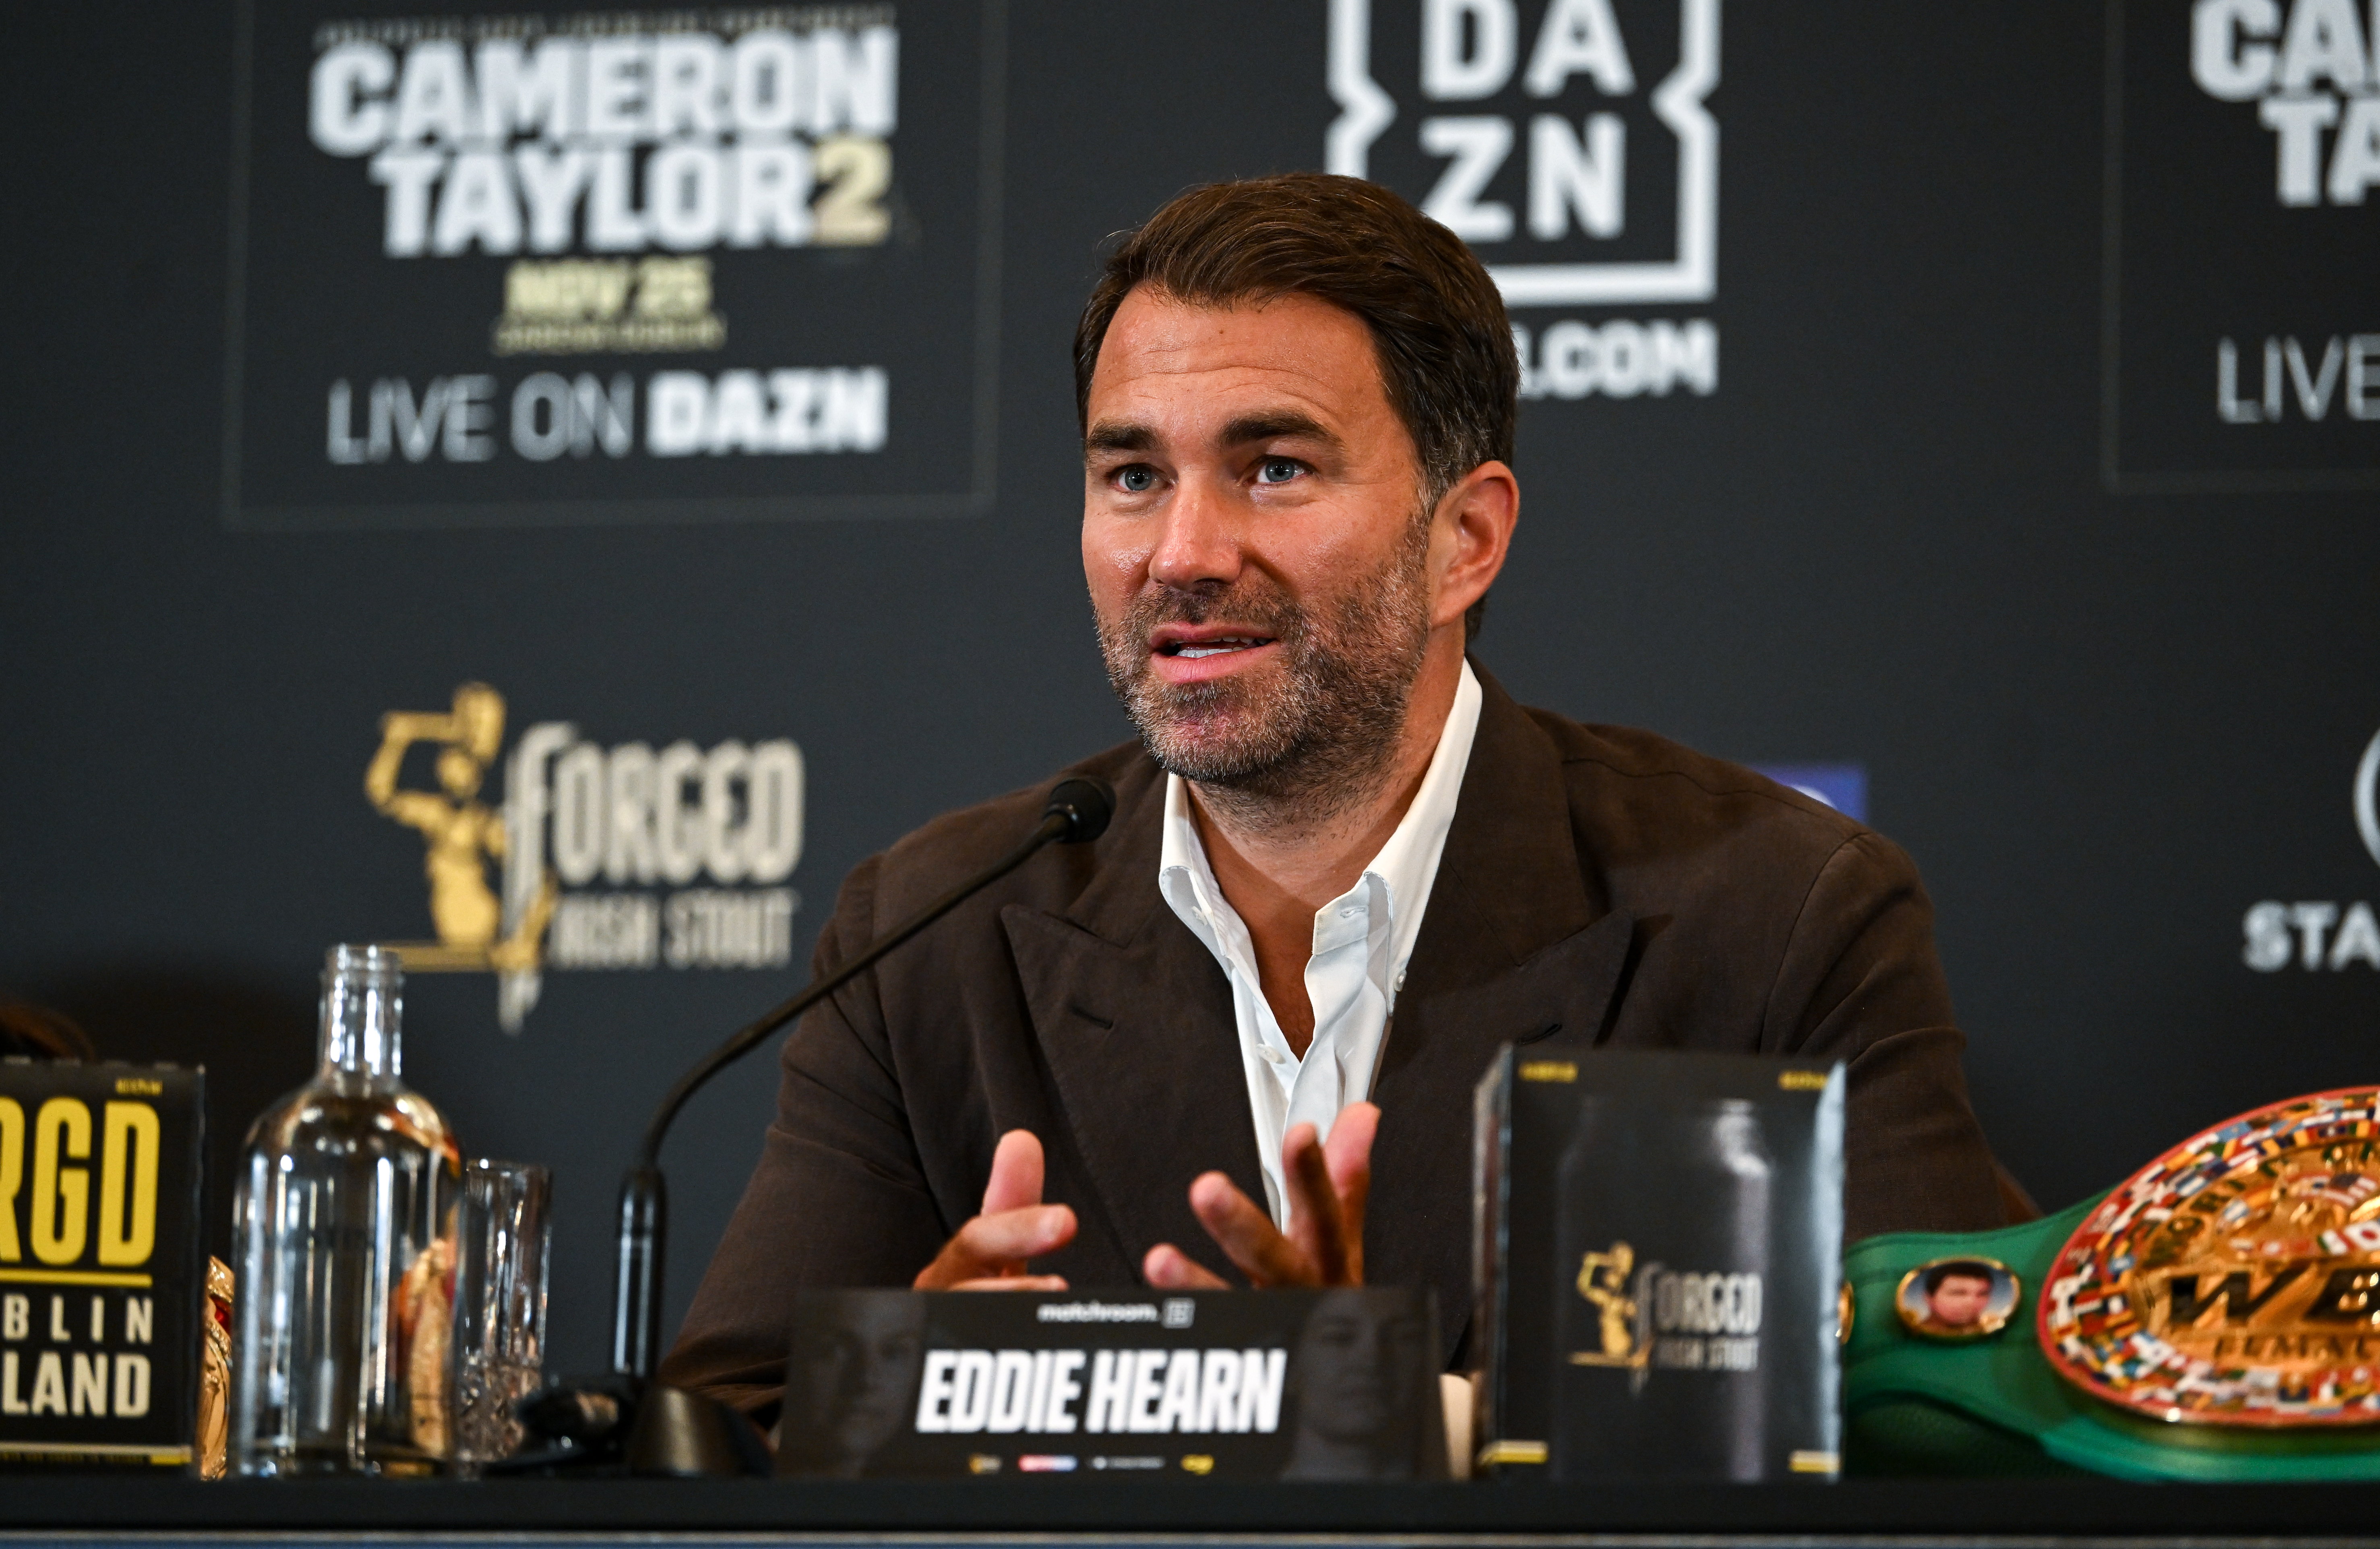 Eddie Hearn says if the money is right he’s willing to consider matching Anthony Joshua against Zhilei Zhang.